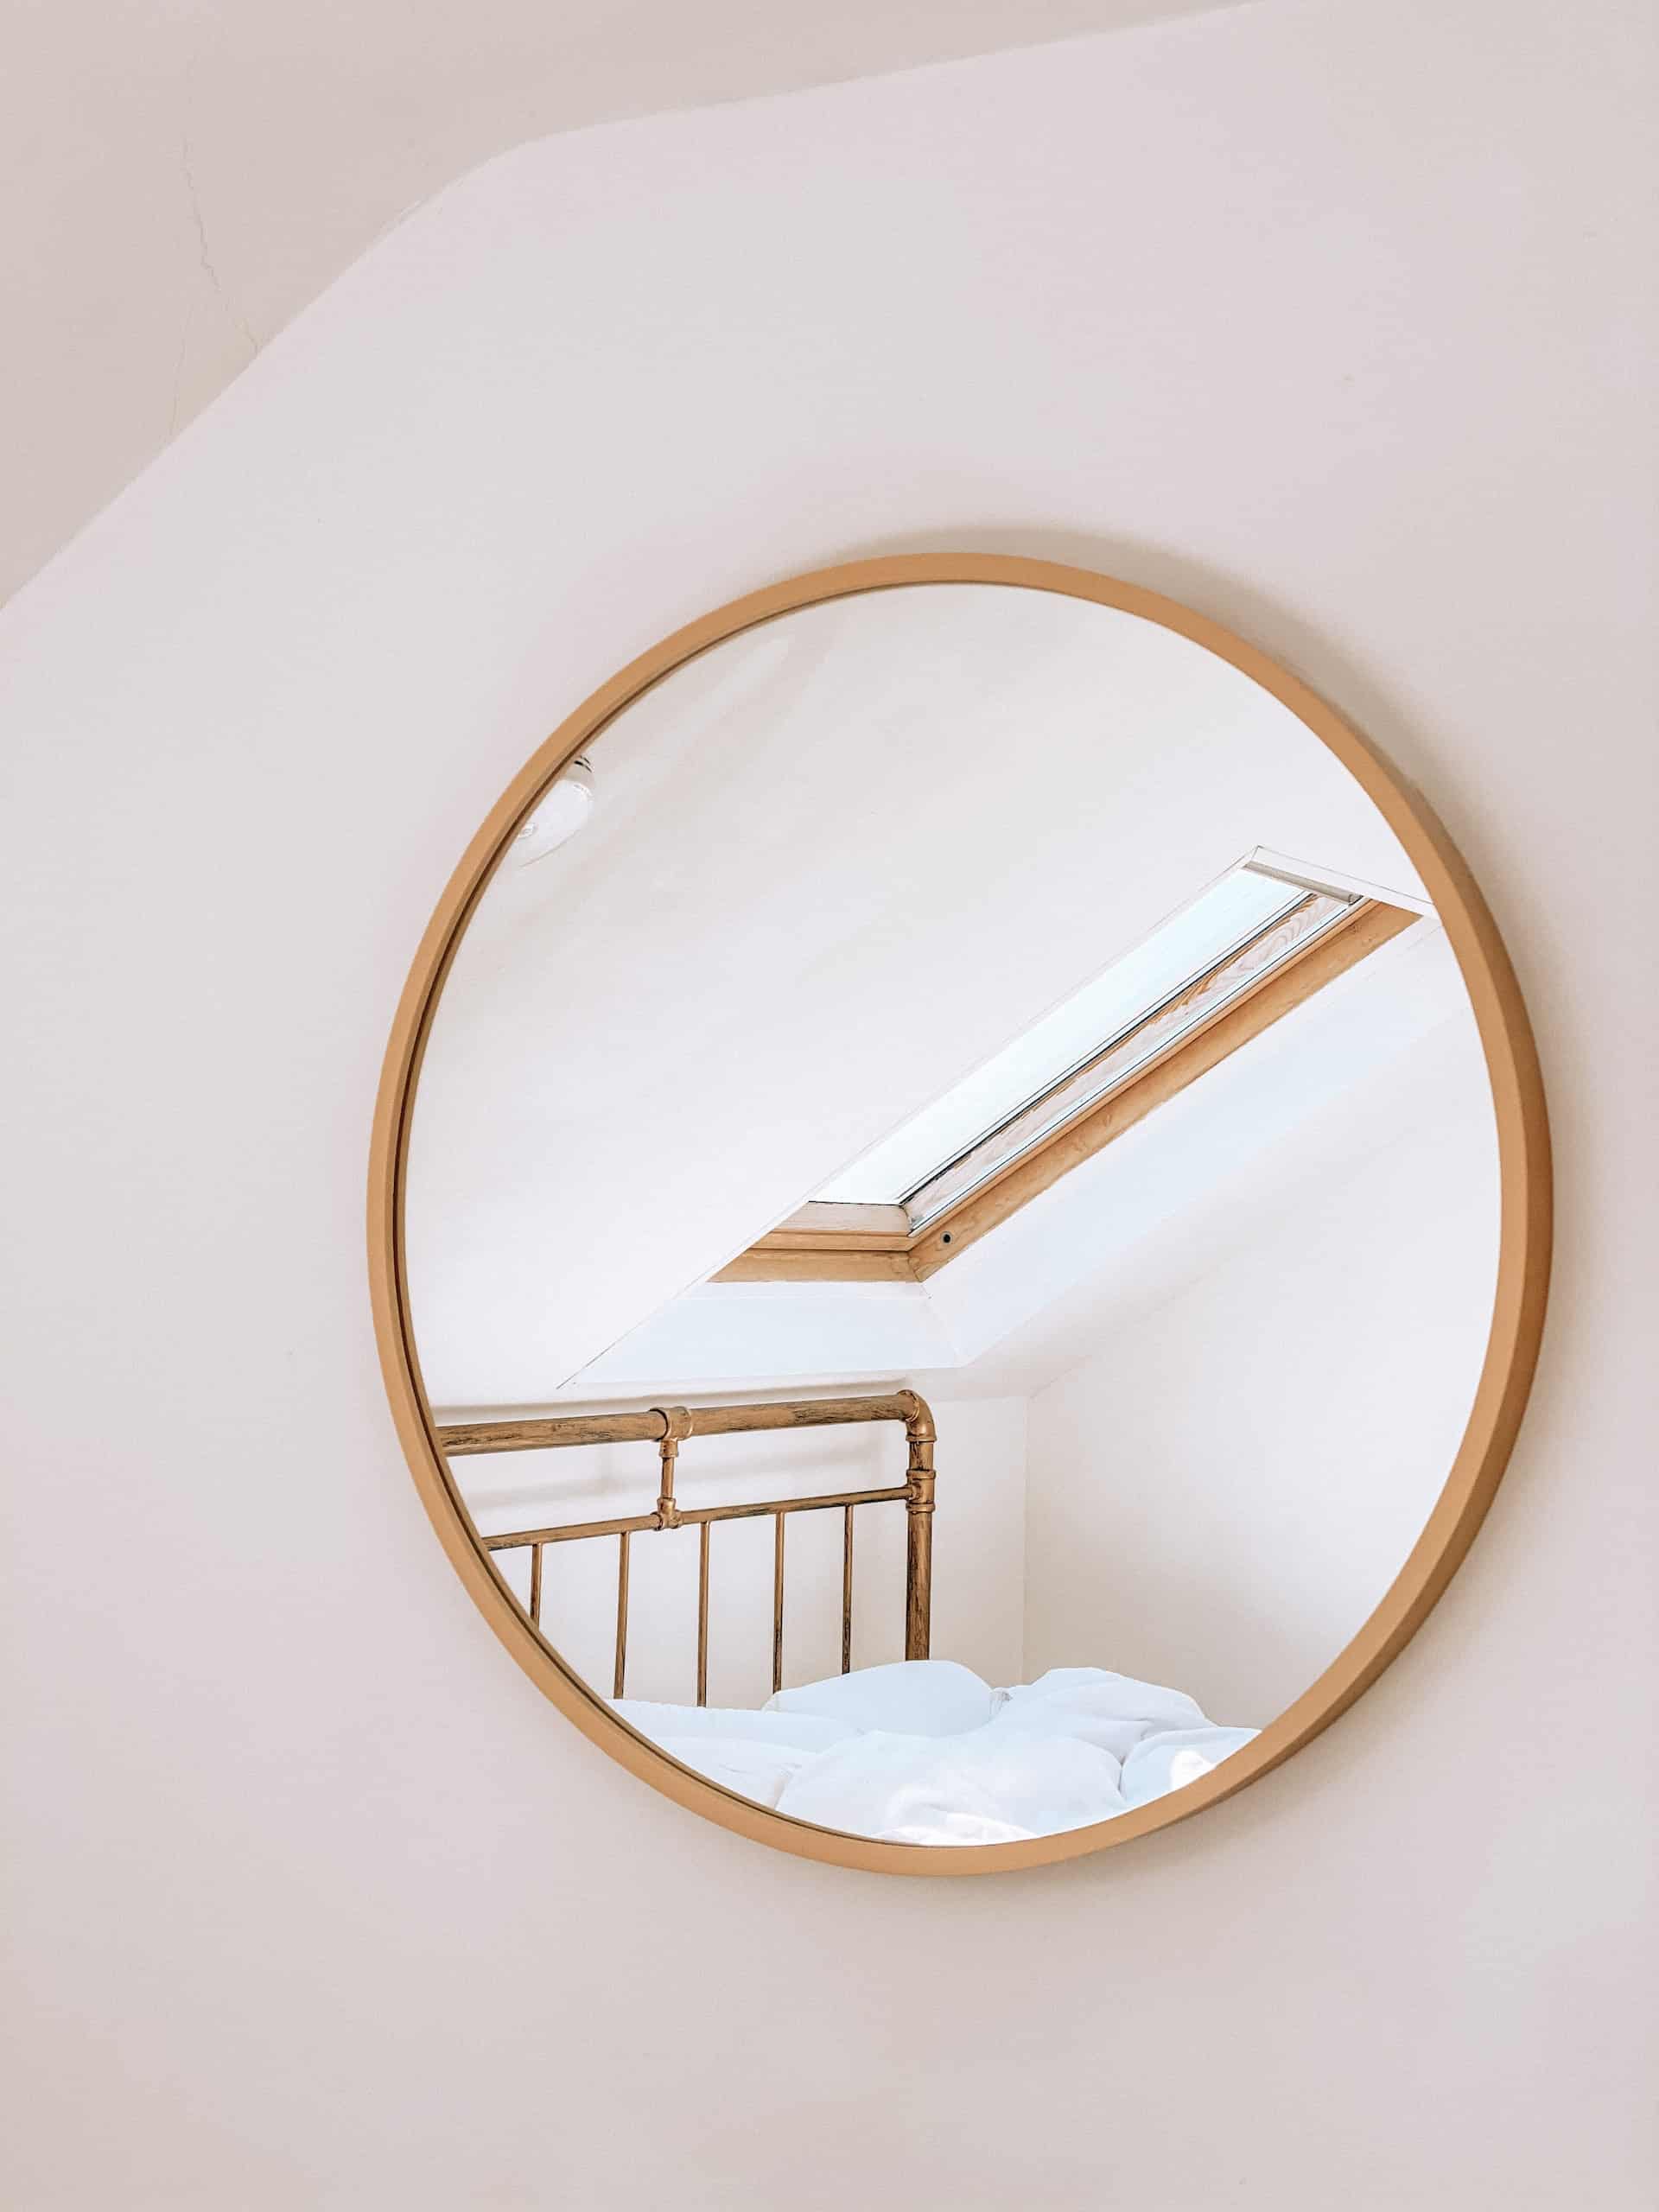 Wall-mounted mirror – what to pay attention to when buying?